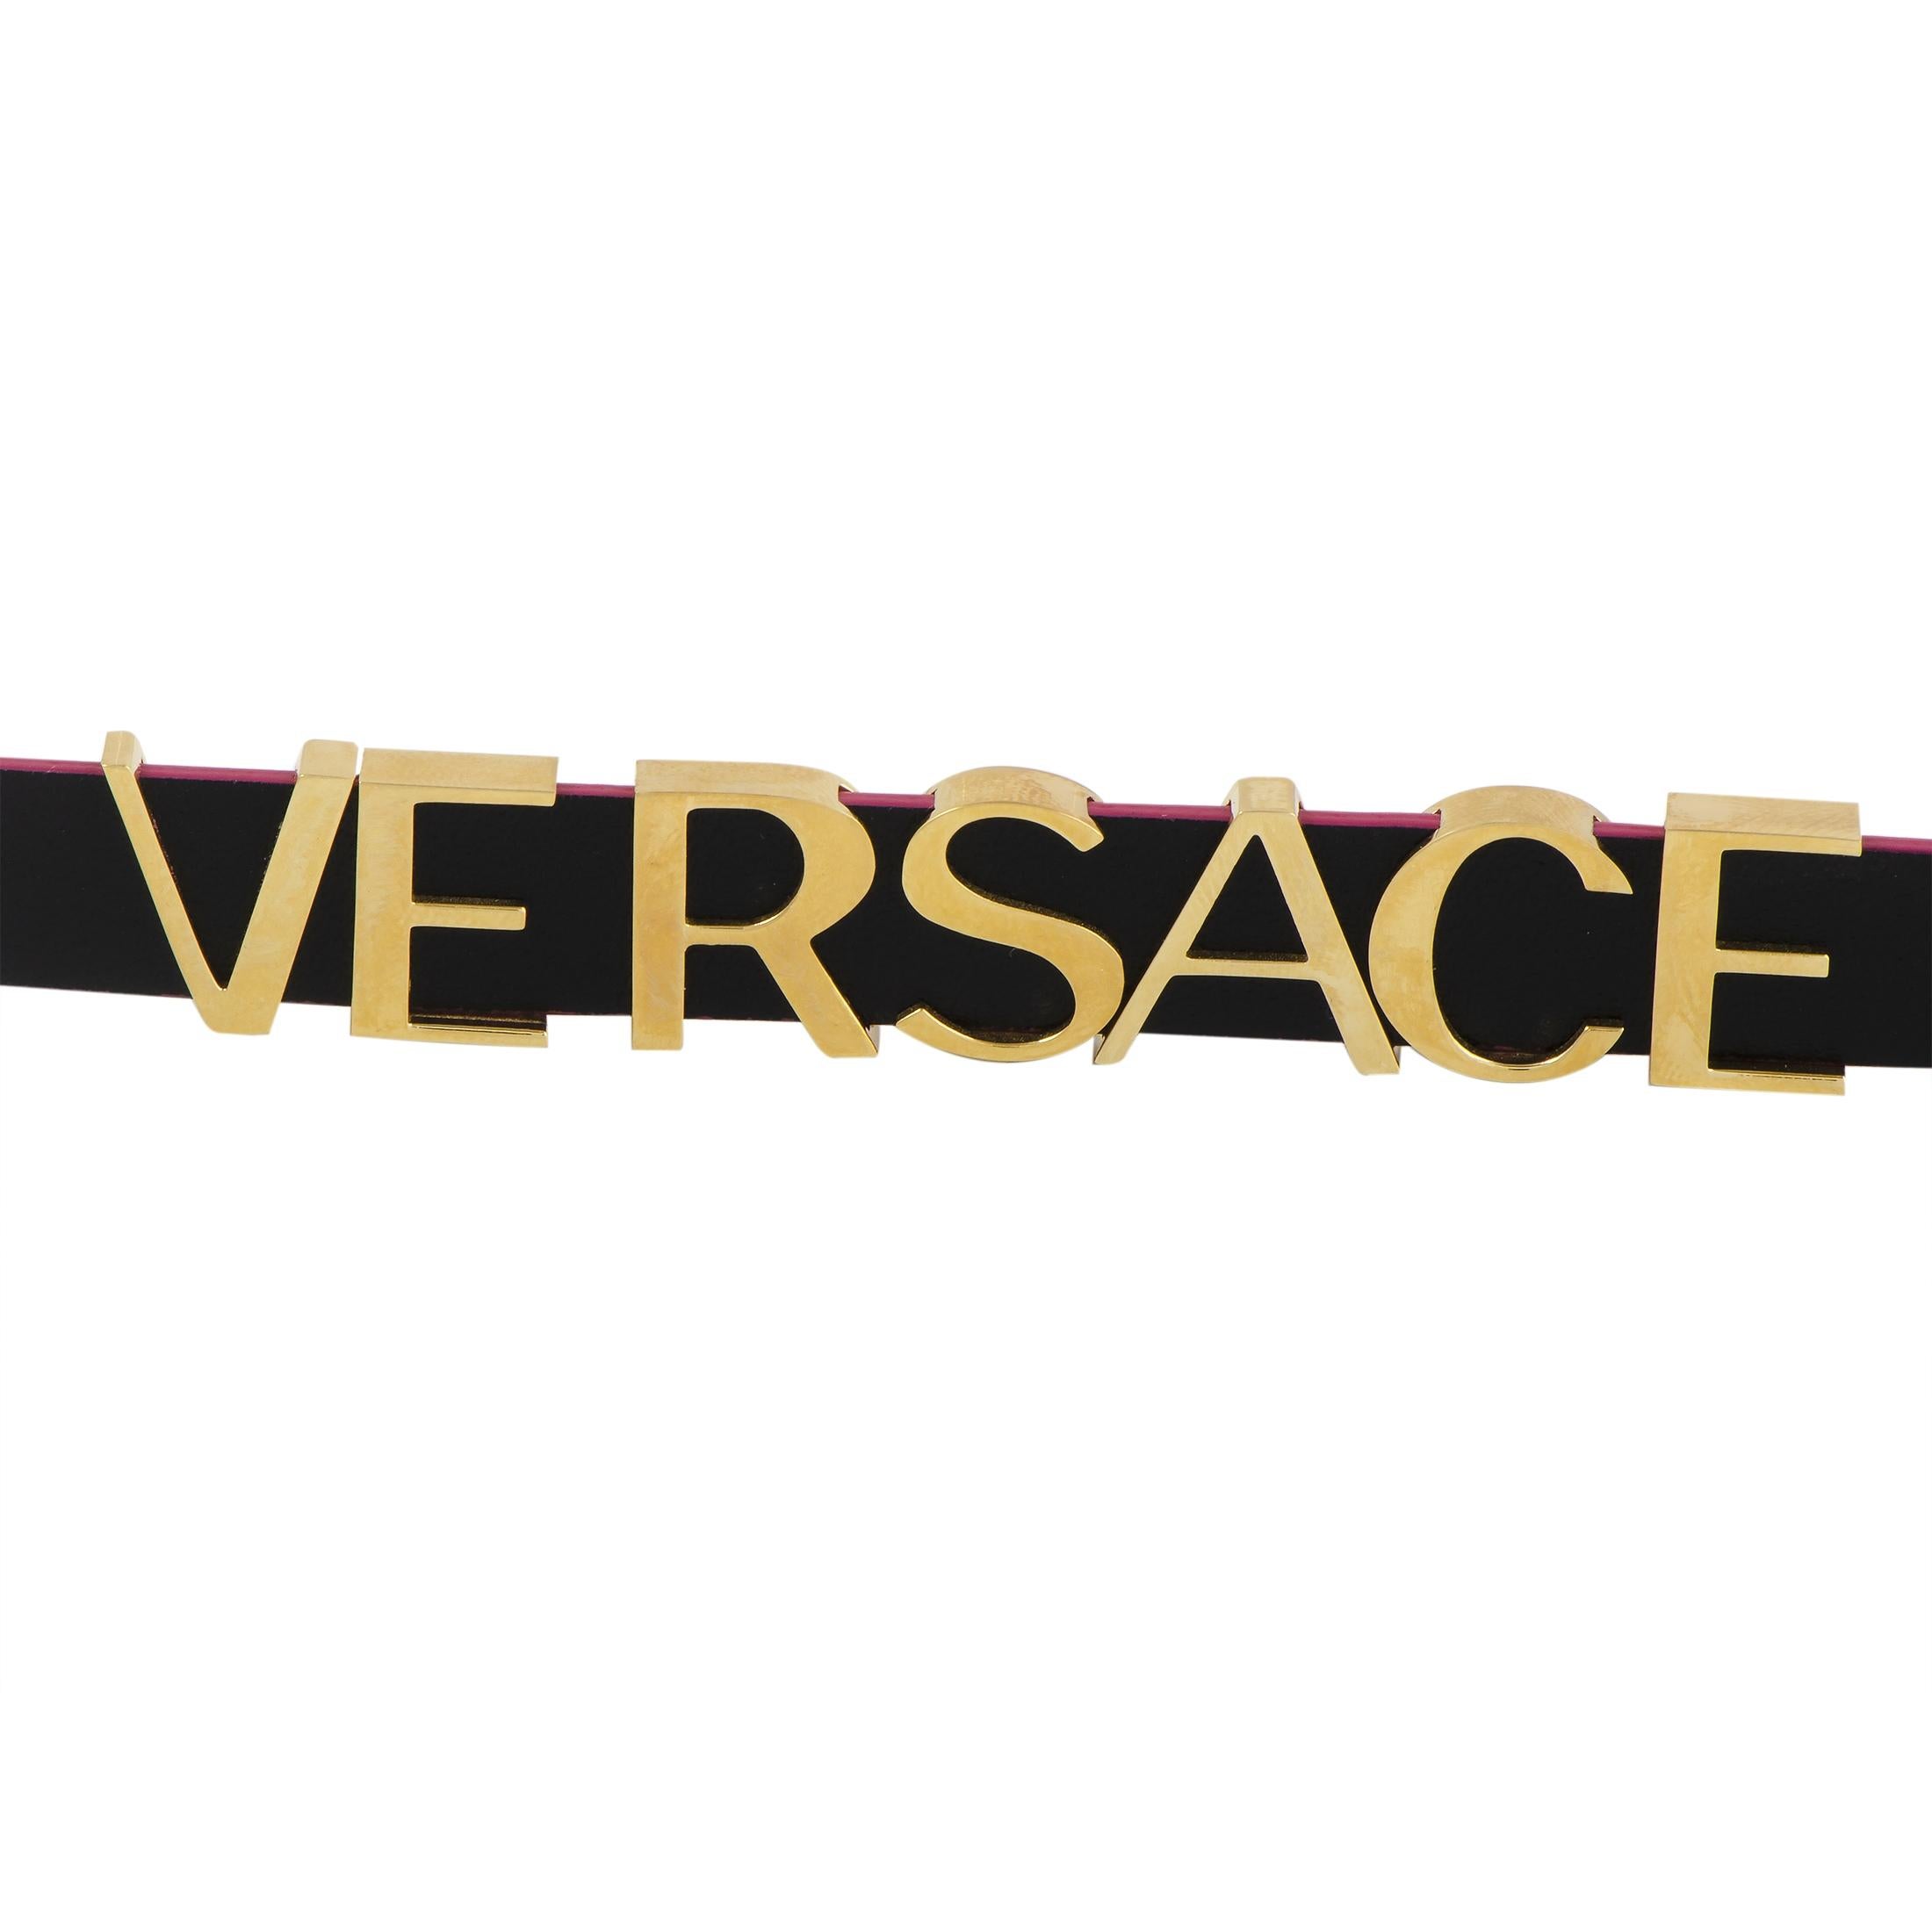 The Versace V-Flare watch, reference number VEBN00218, comes with a 28 mm stainless steel case that offers water resistance of 30 meters. The case is presented on a black leather strap fitted with a tang buckle. The watch is powered by a quartz